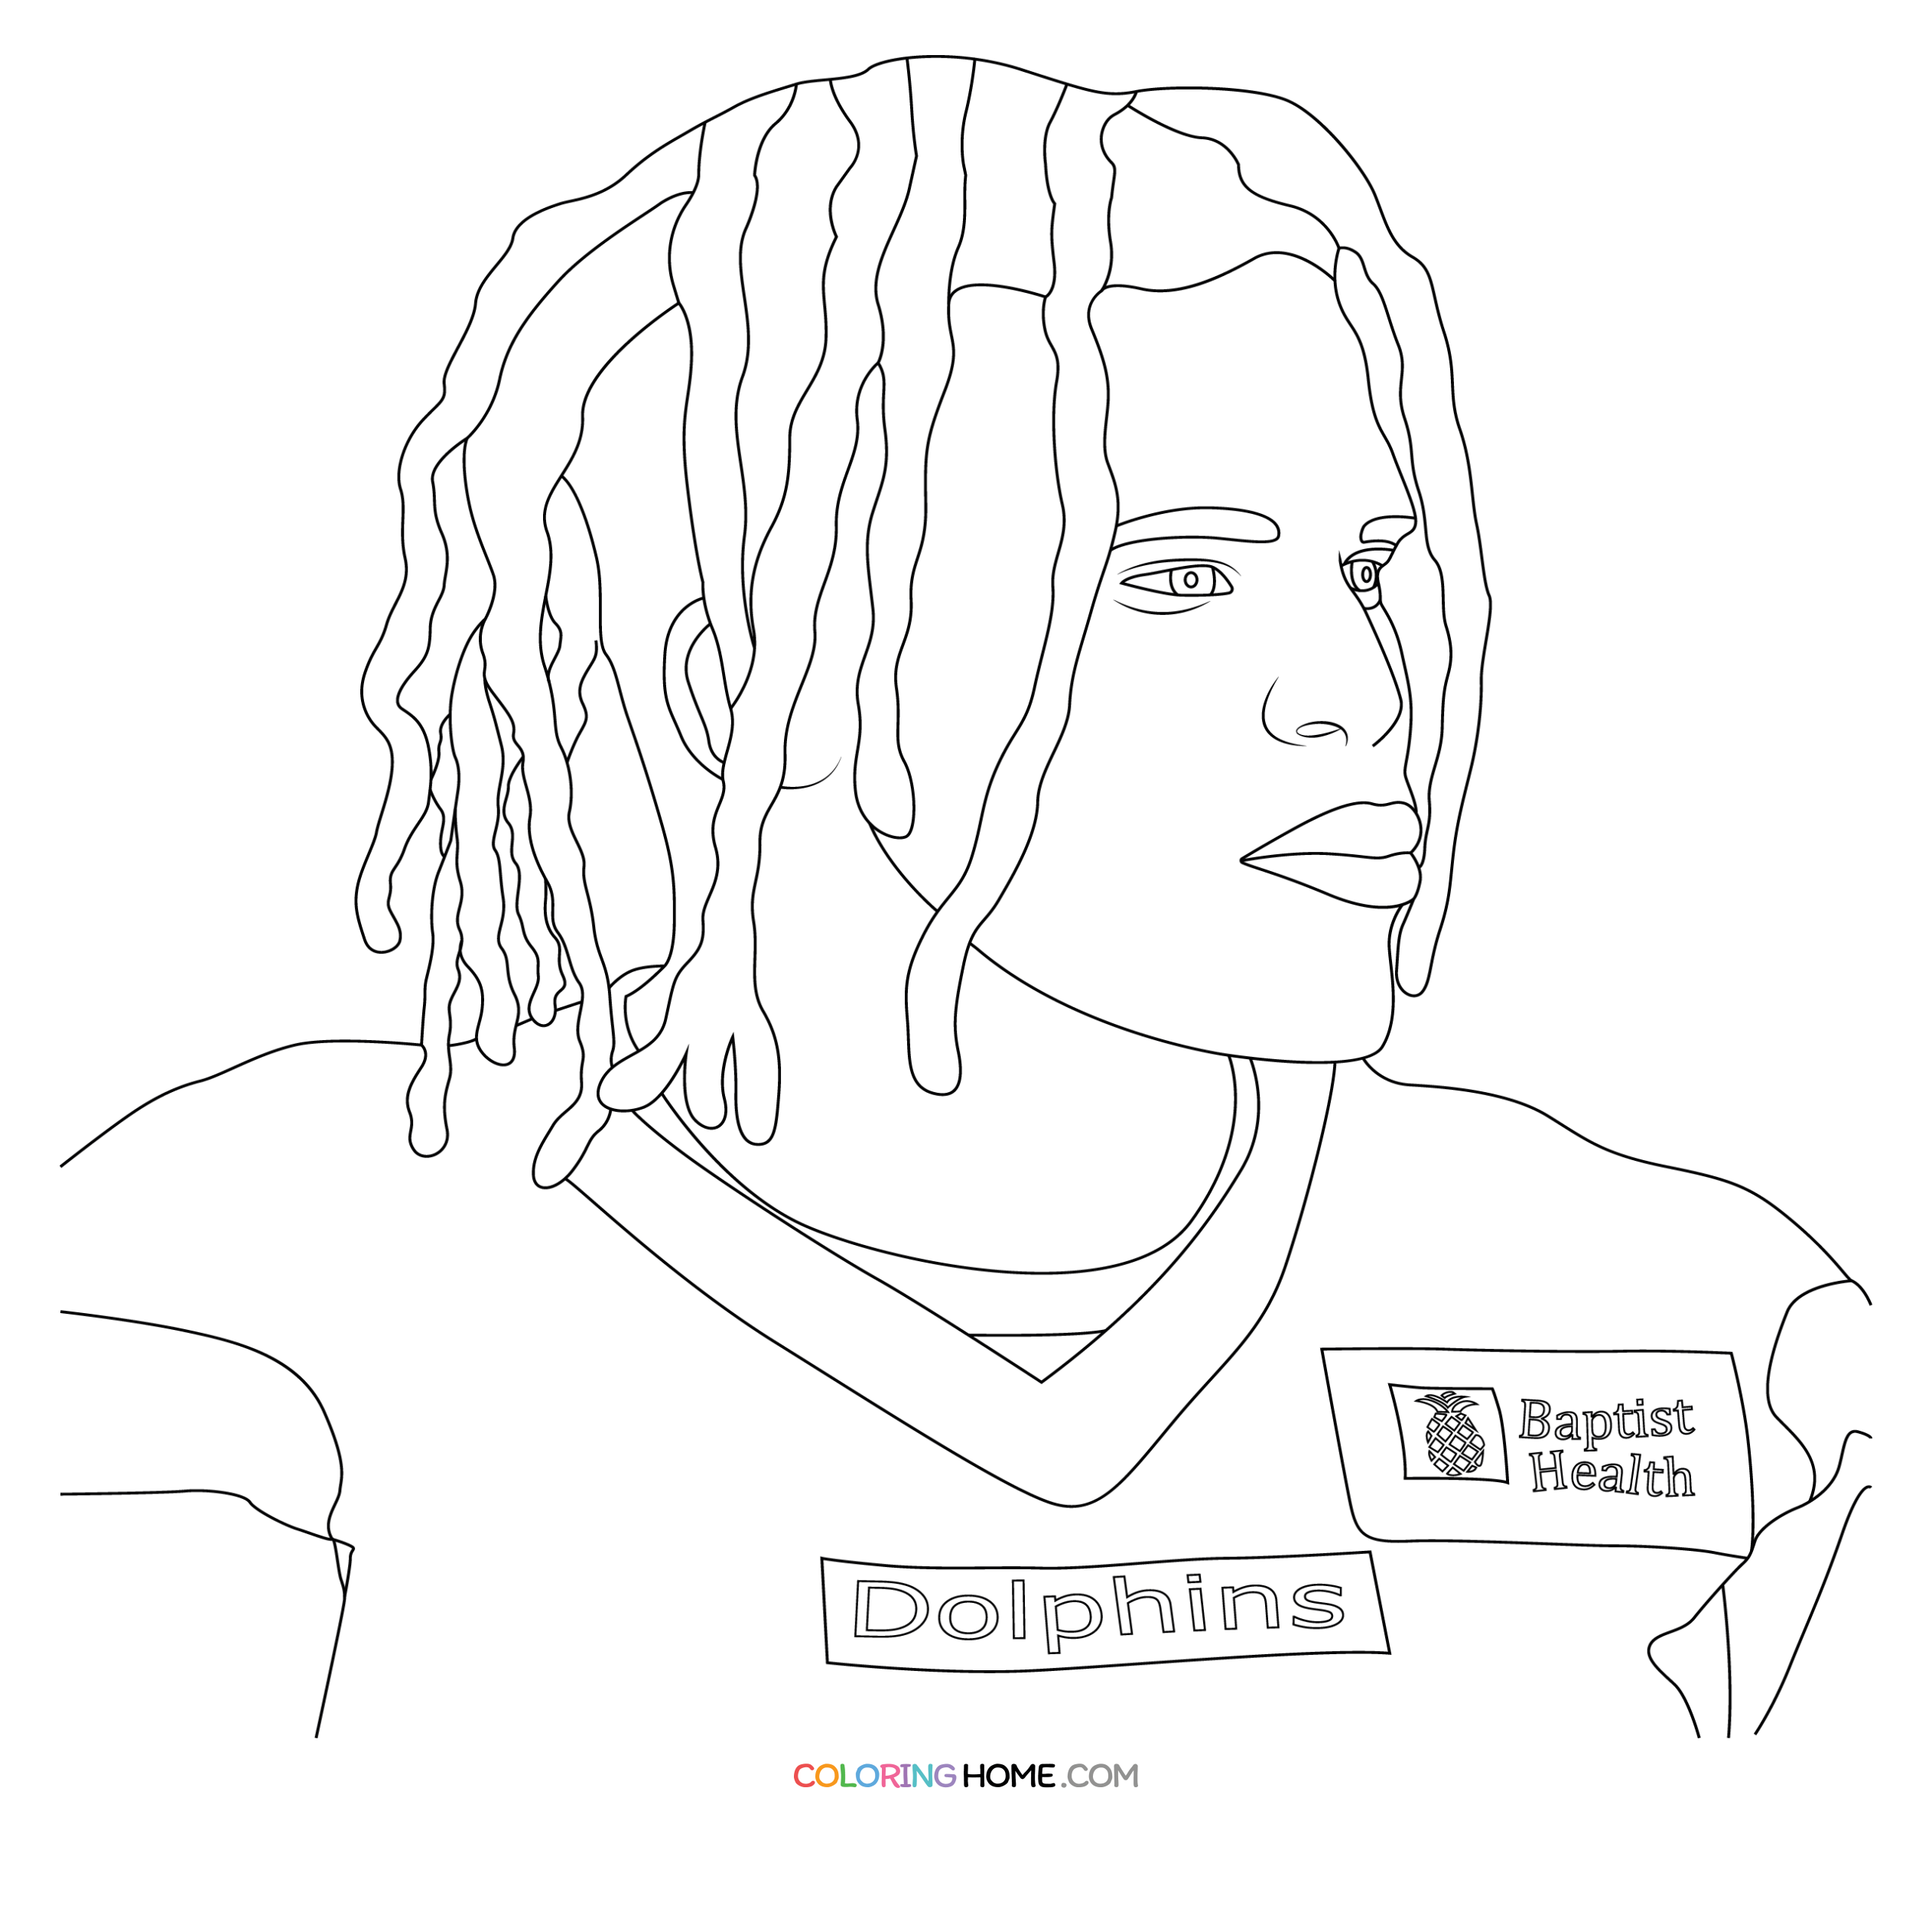 Tyreek Hill Miami Dolphins coloring page